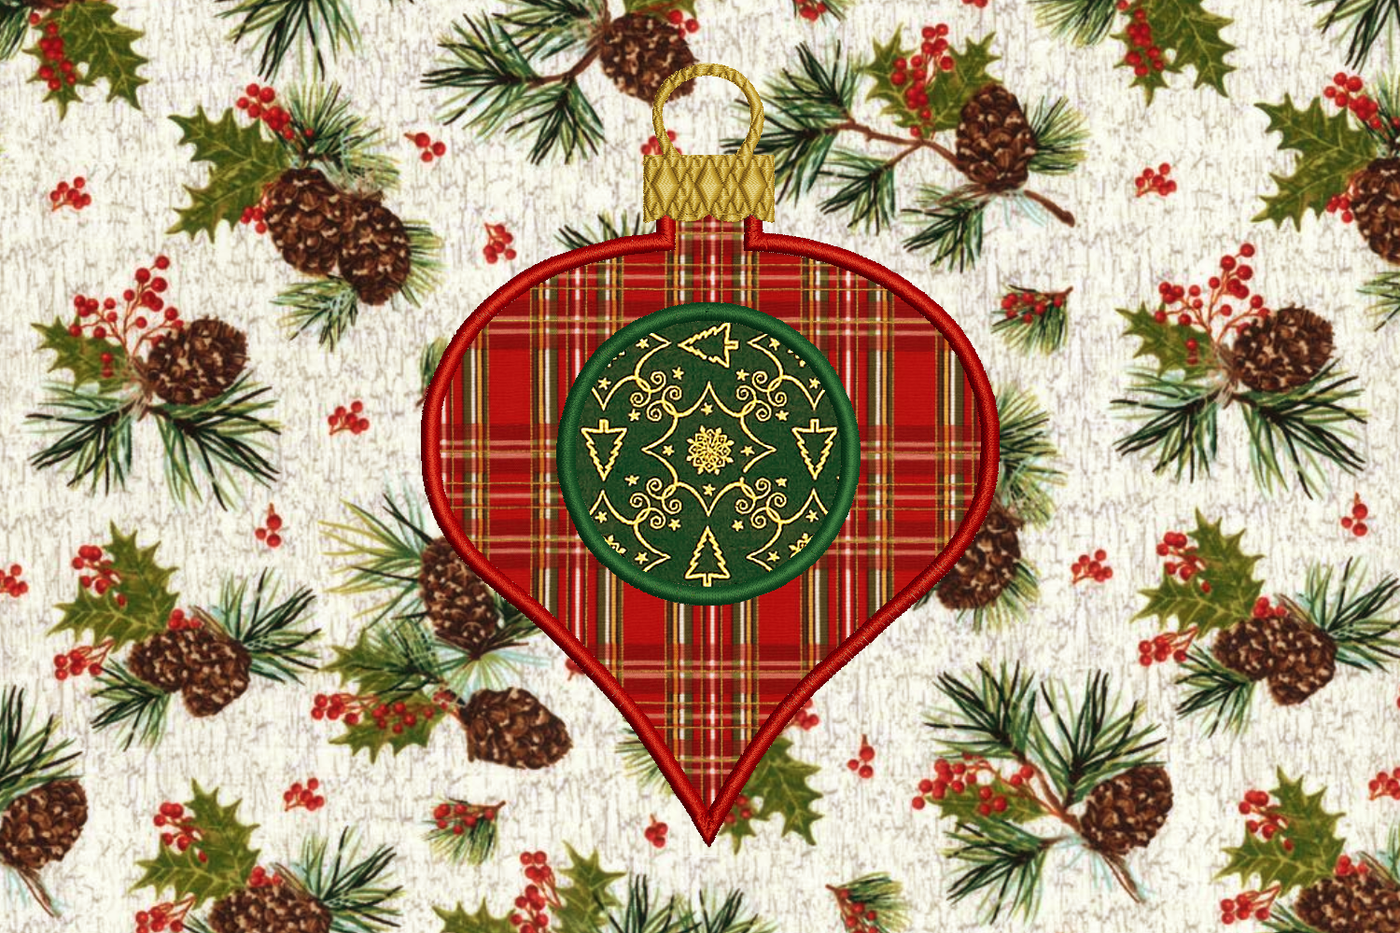 Onion shaped ornament applique with a circle in the middle for adding a monogram